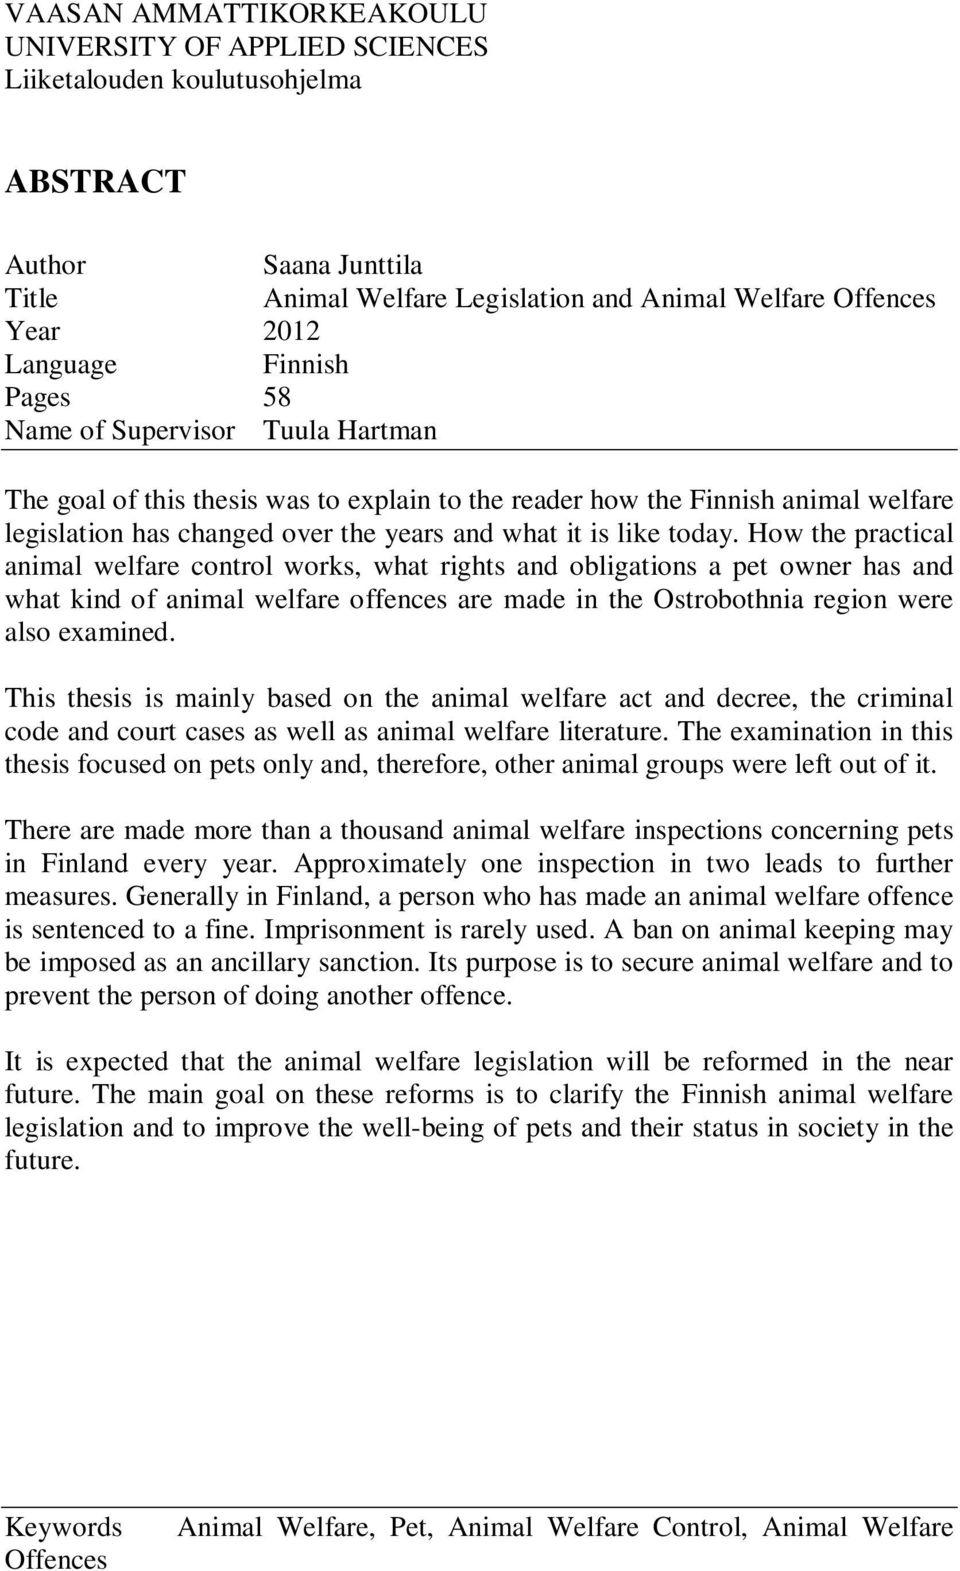 How the practical animal welfare control works, what rights and obligations a pet owner has and what kind of animal welfare offences are made in the Ostrobothnia region were also examined.